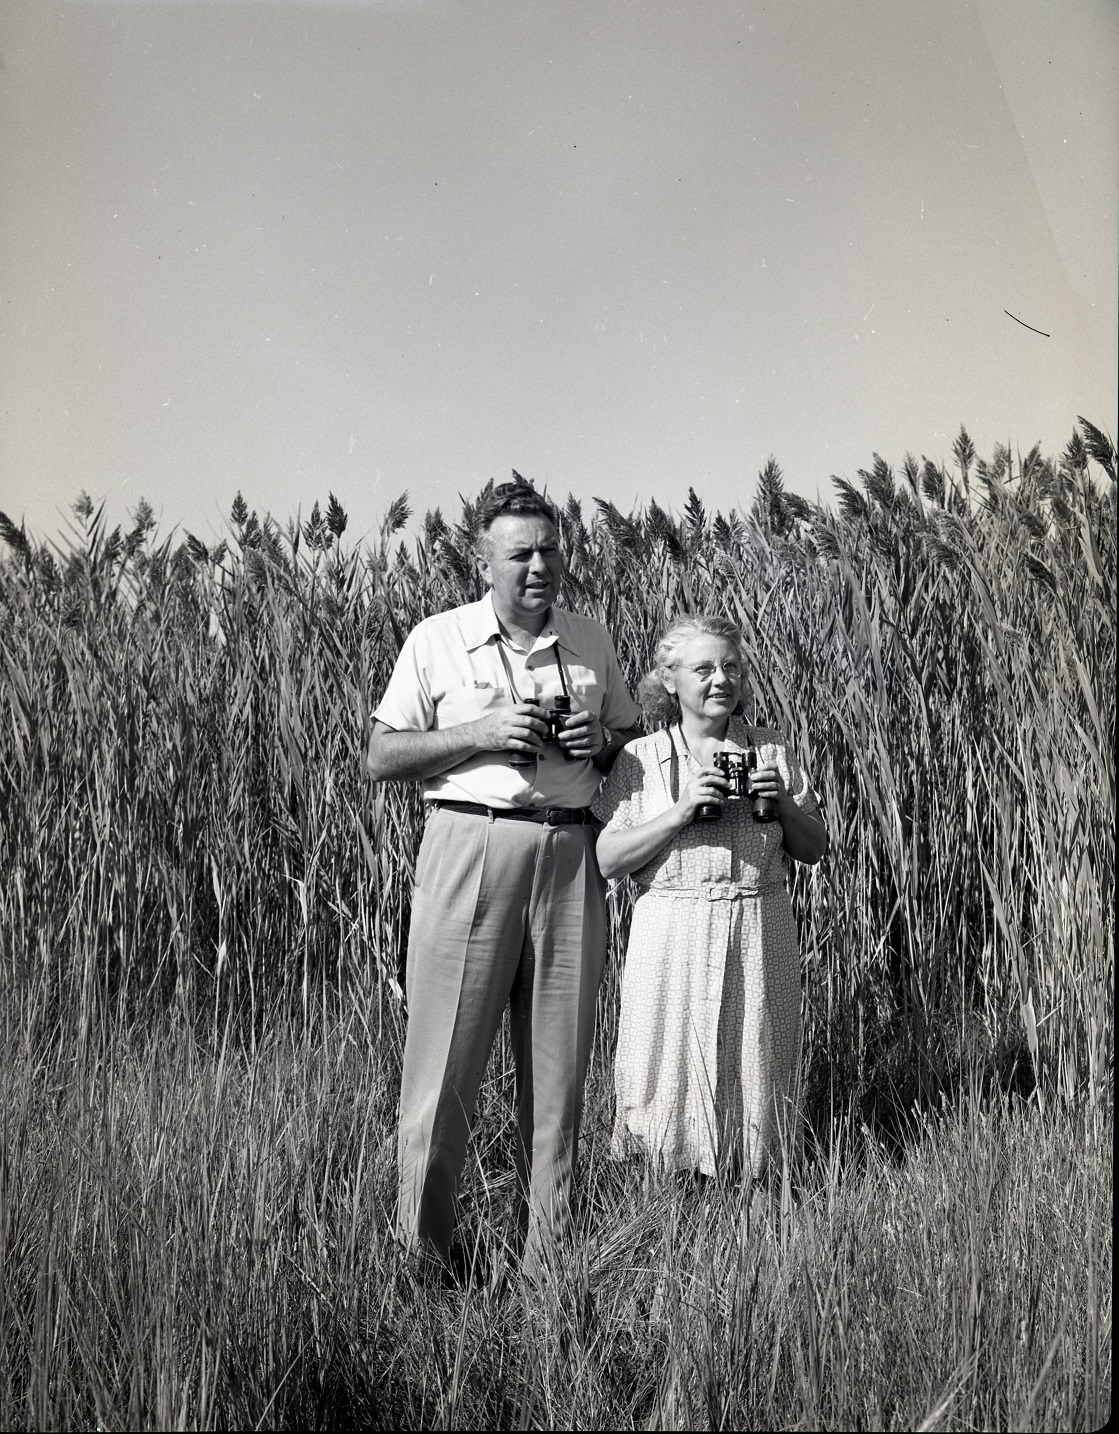 Man and woman stand in dress clothes and a summer dress; each holding binoculars and looking out into the distance with a wall of phragmites behind them